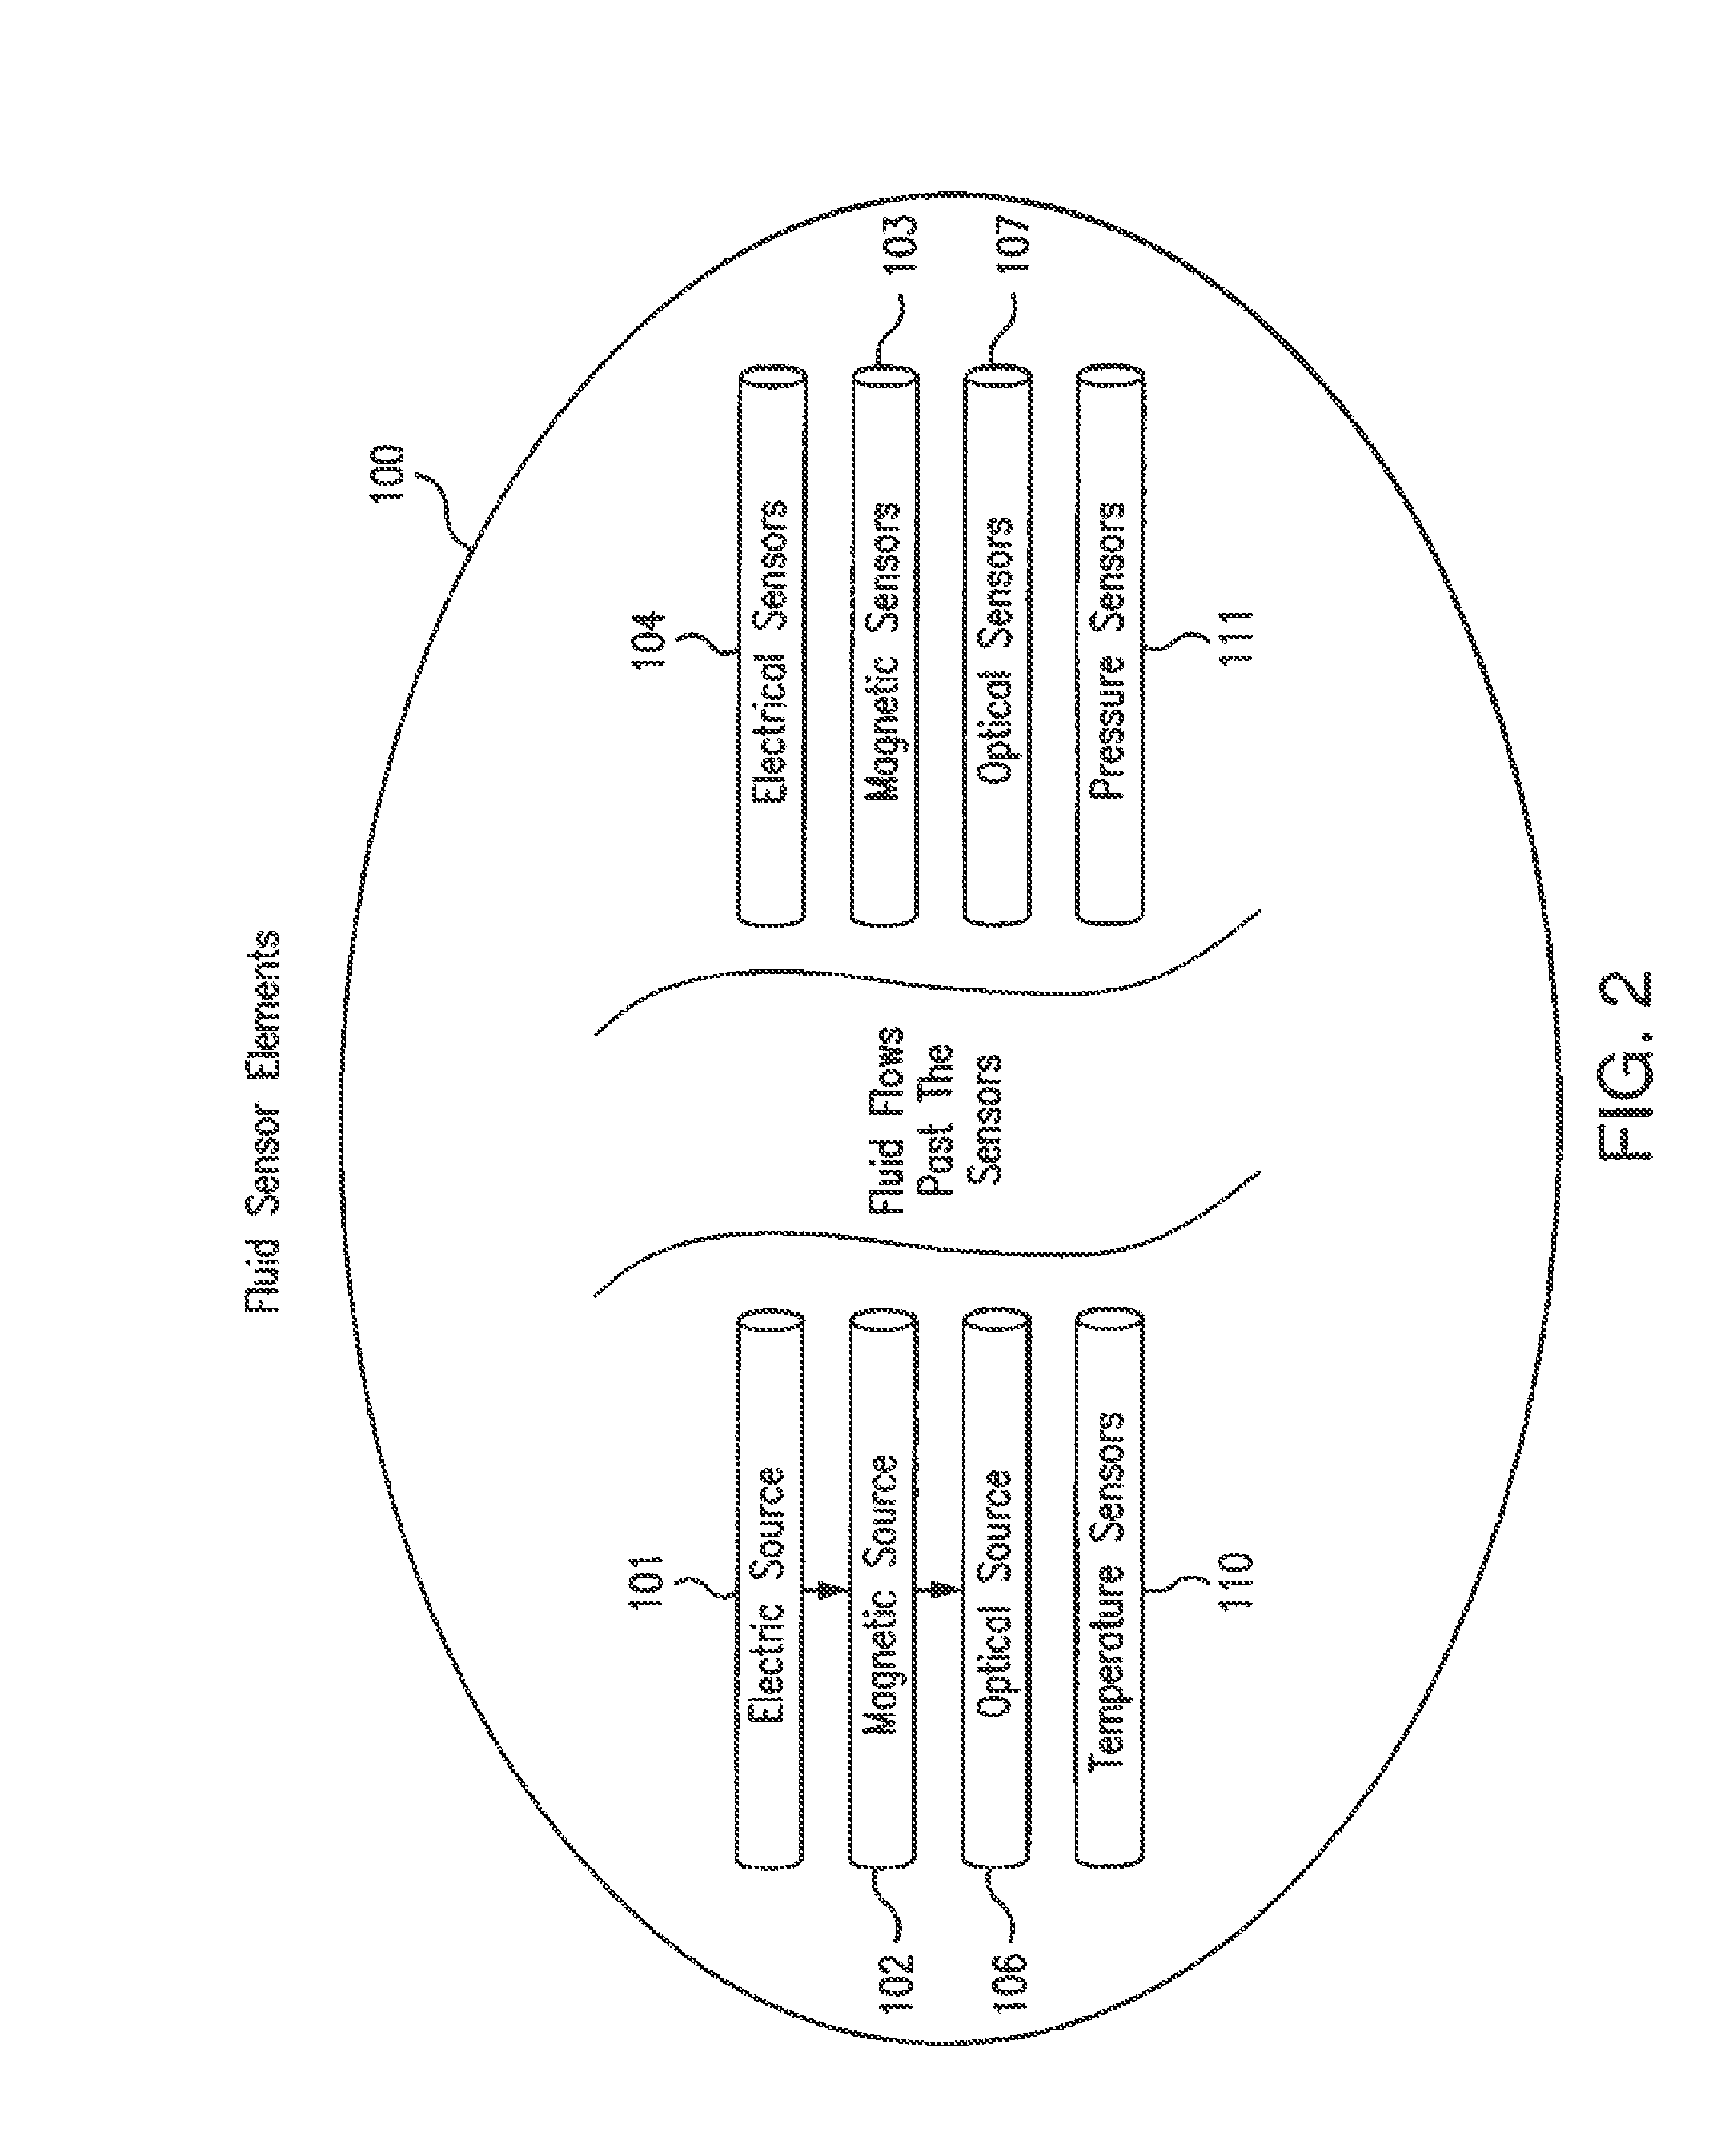 Multi-modal fluid condition sensor platform and system therefor